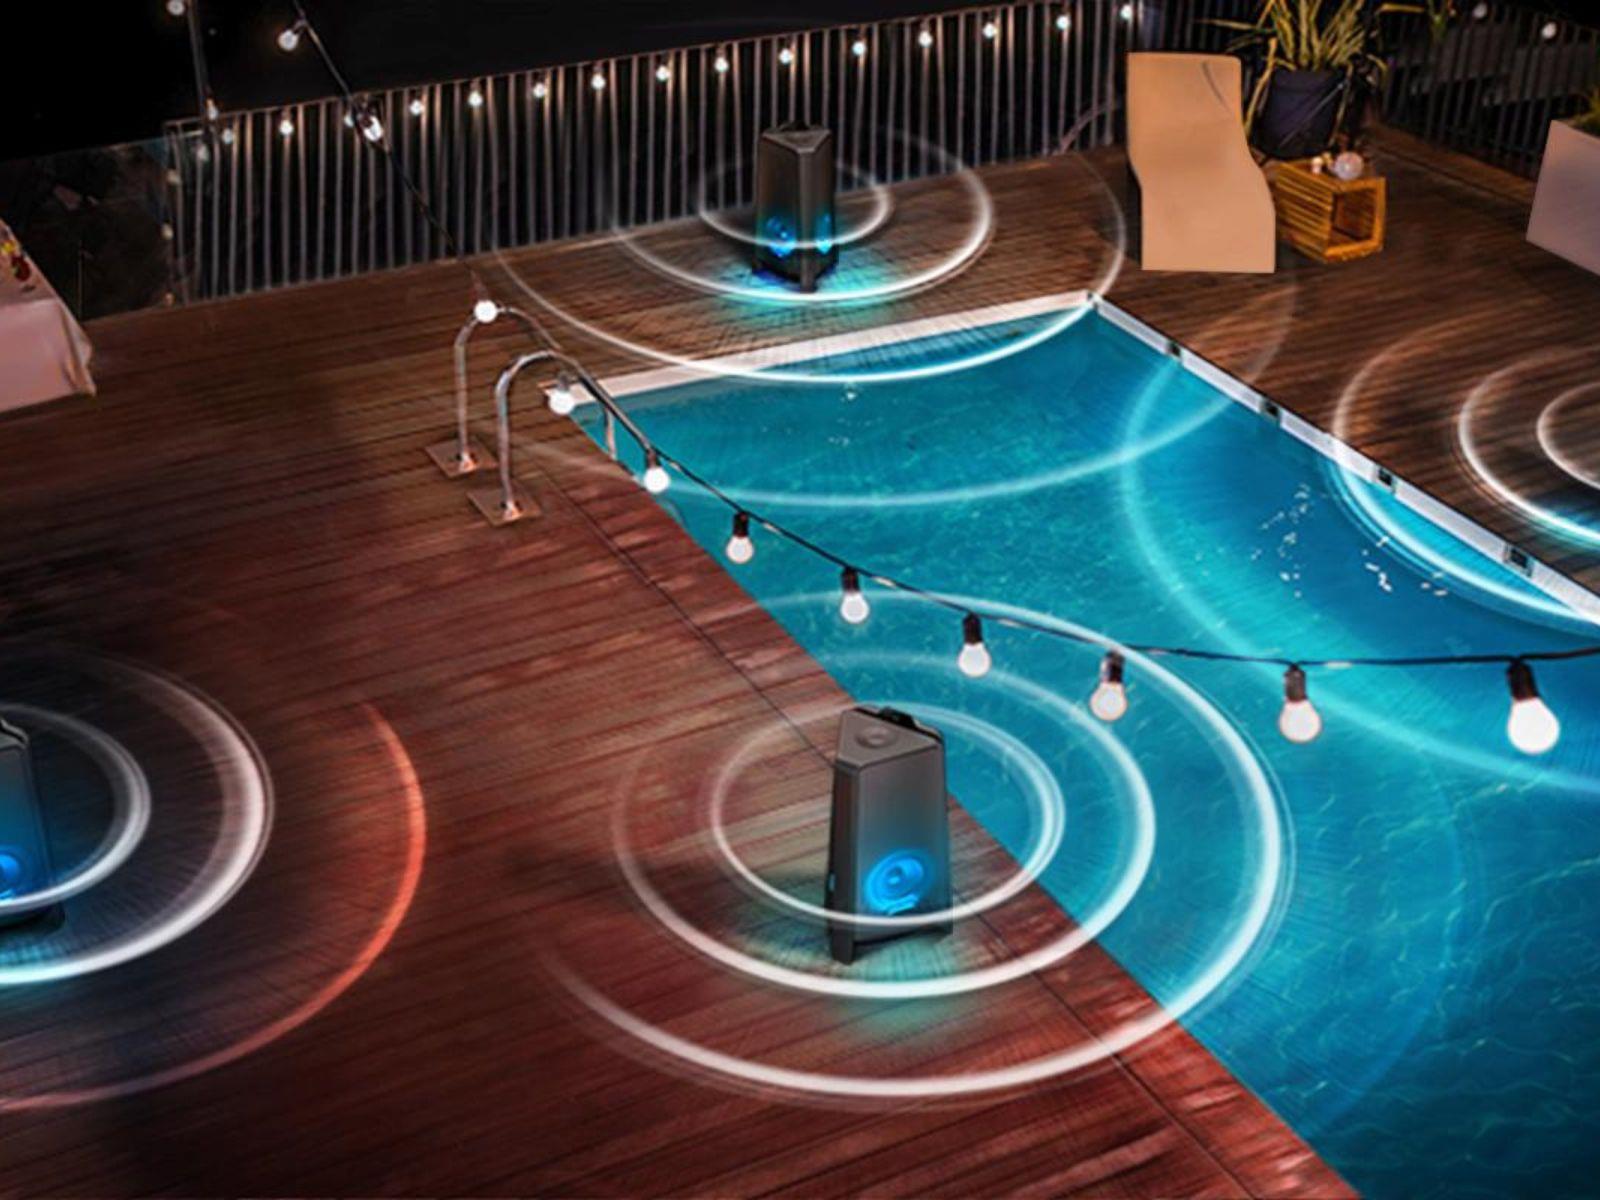 Samsung MX-T50 Sound Towers around a swimming pool